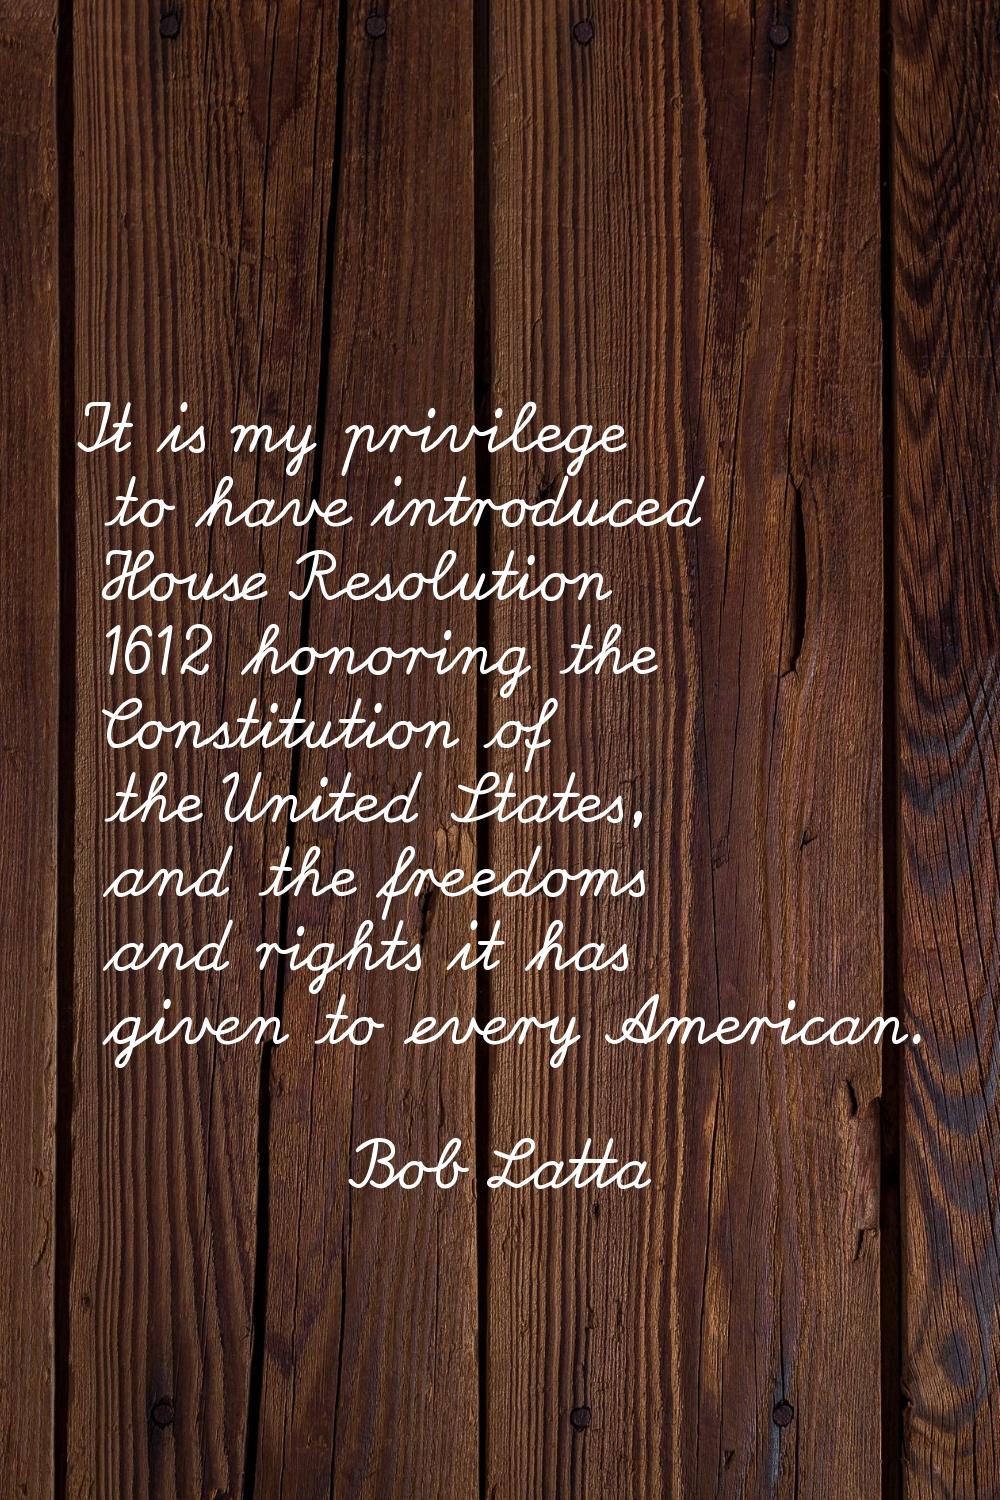 It is my privilege to have introduced House Resolution 1612 honoring the Constitution of the United